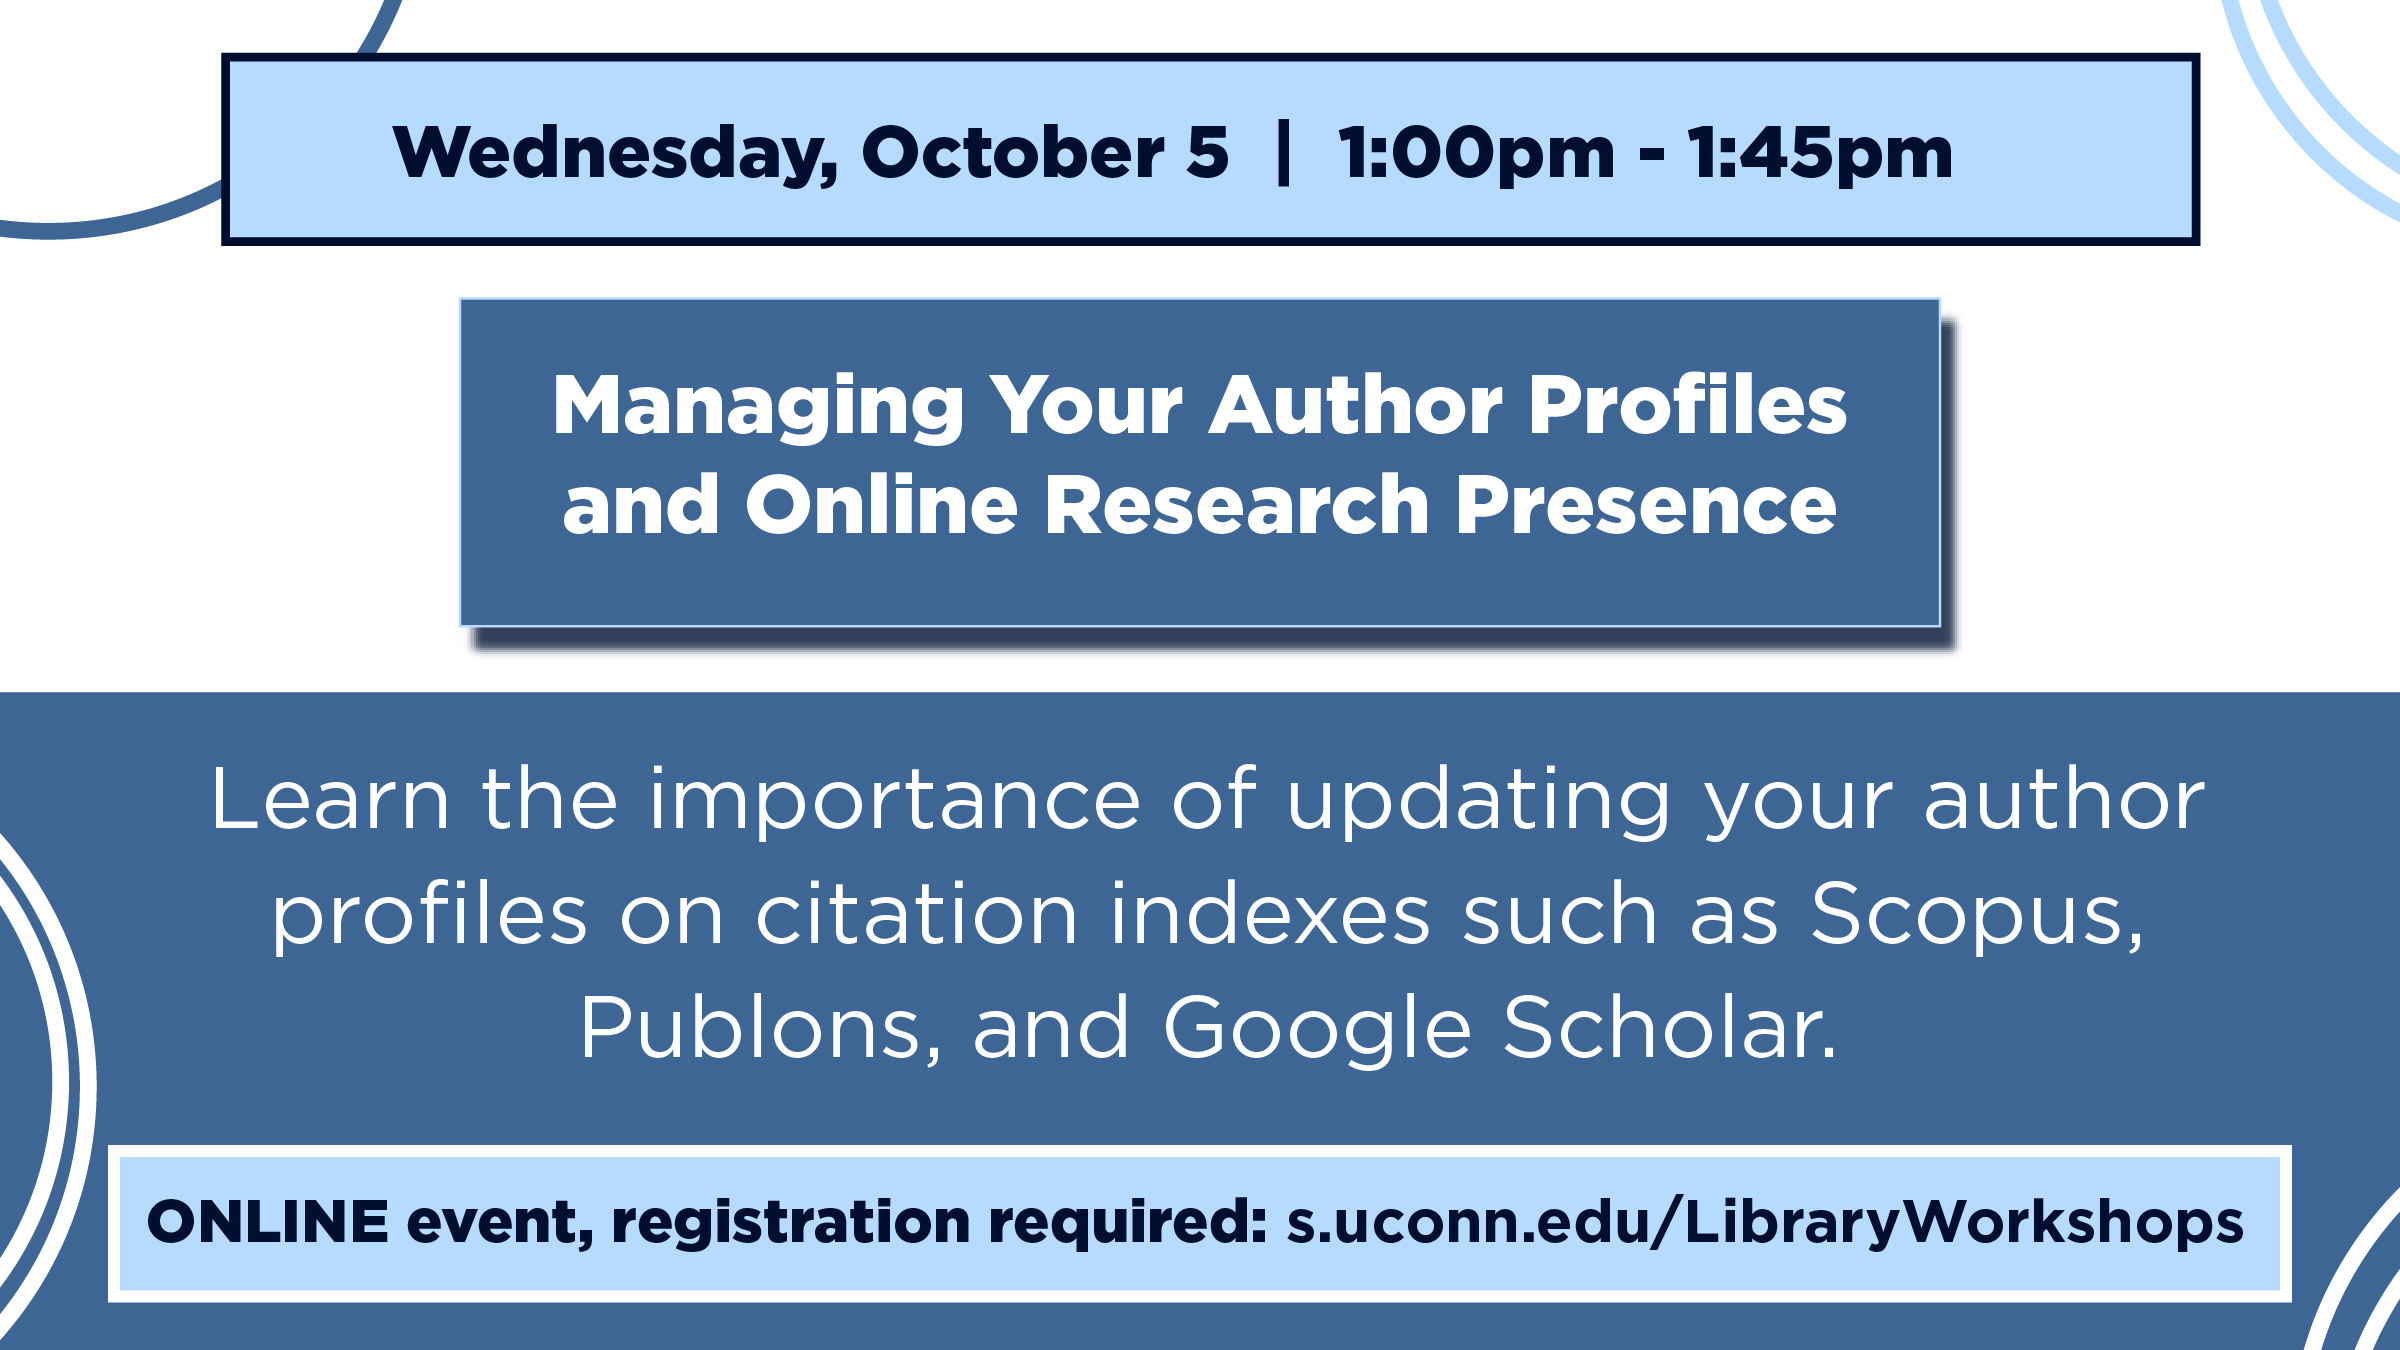 Marketign image with a blue and whote geometric background and the text: Wednesday, October 5 | 1:00pm - 1:45pm, Managing Your Author Profiles and Online Research Presence, Learn the importance of updating your author profiles on citation indexes such as Scopus, Publons, and Google Scholar. ONLINE event, registration required: s.uconn.edu/LibraryWorkshops